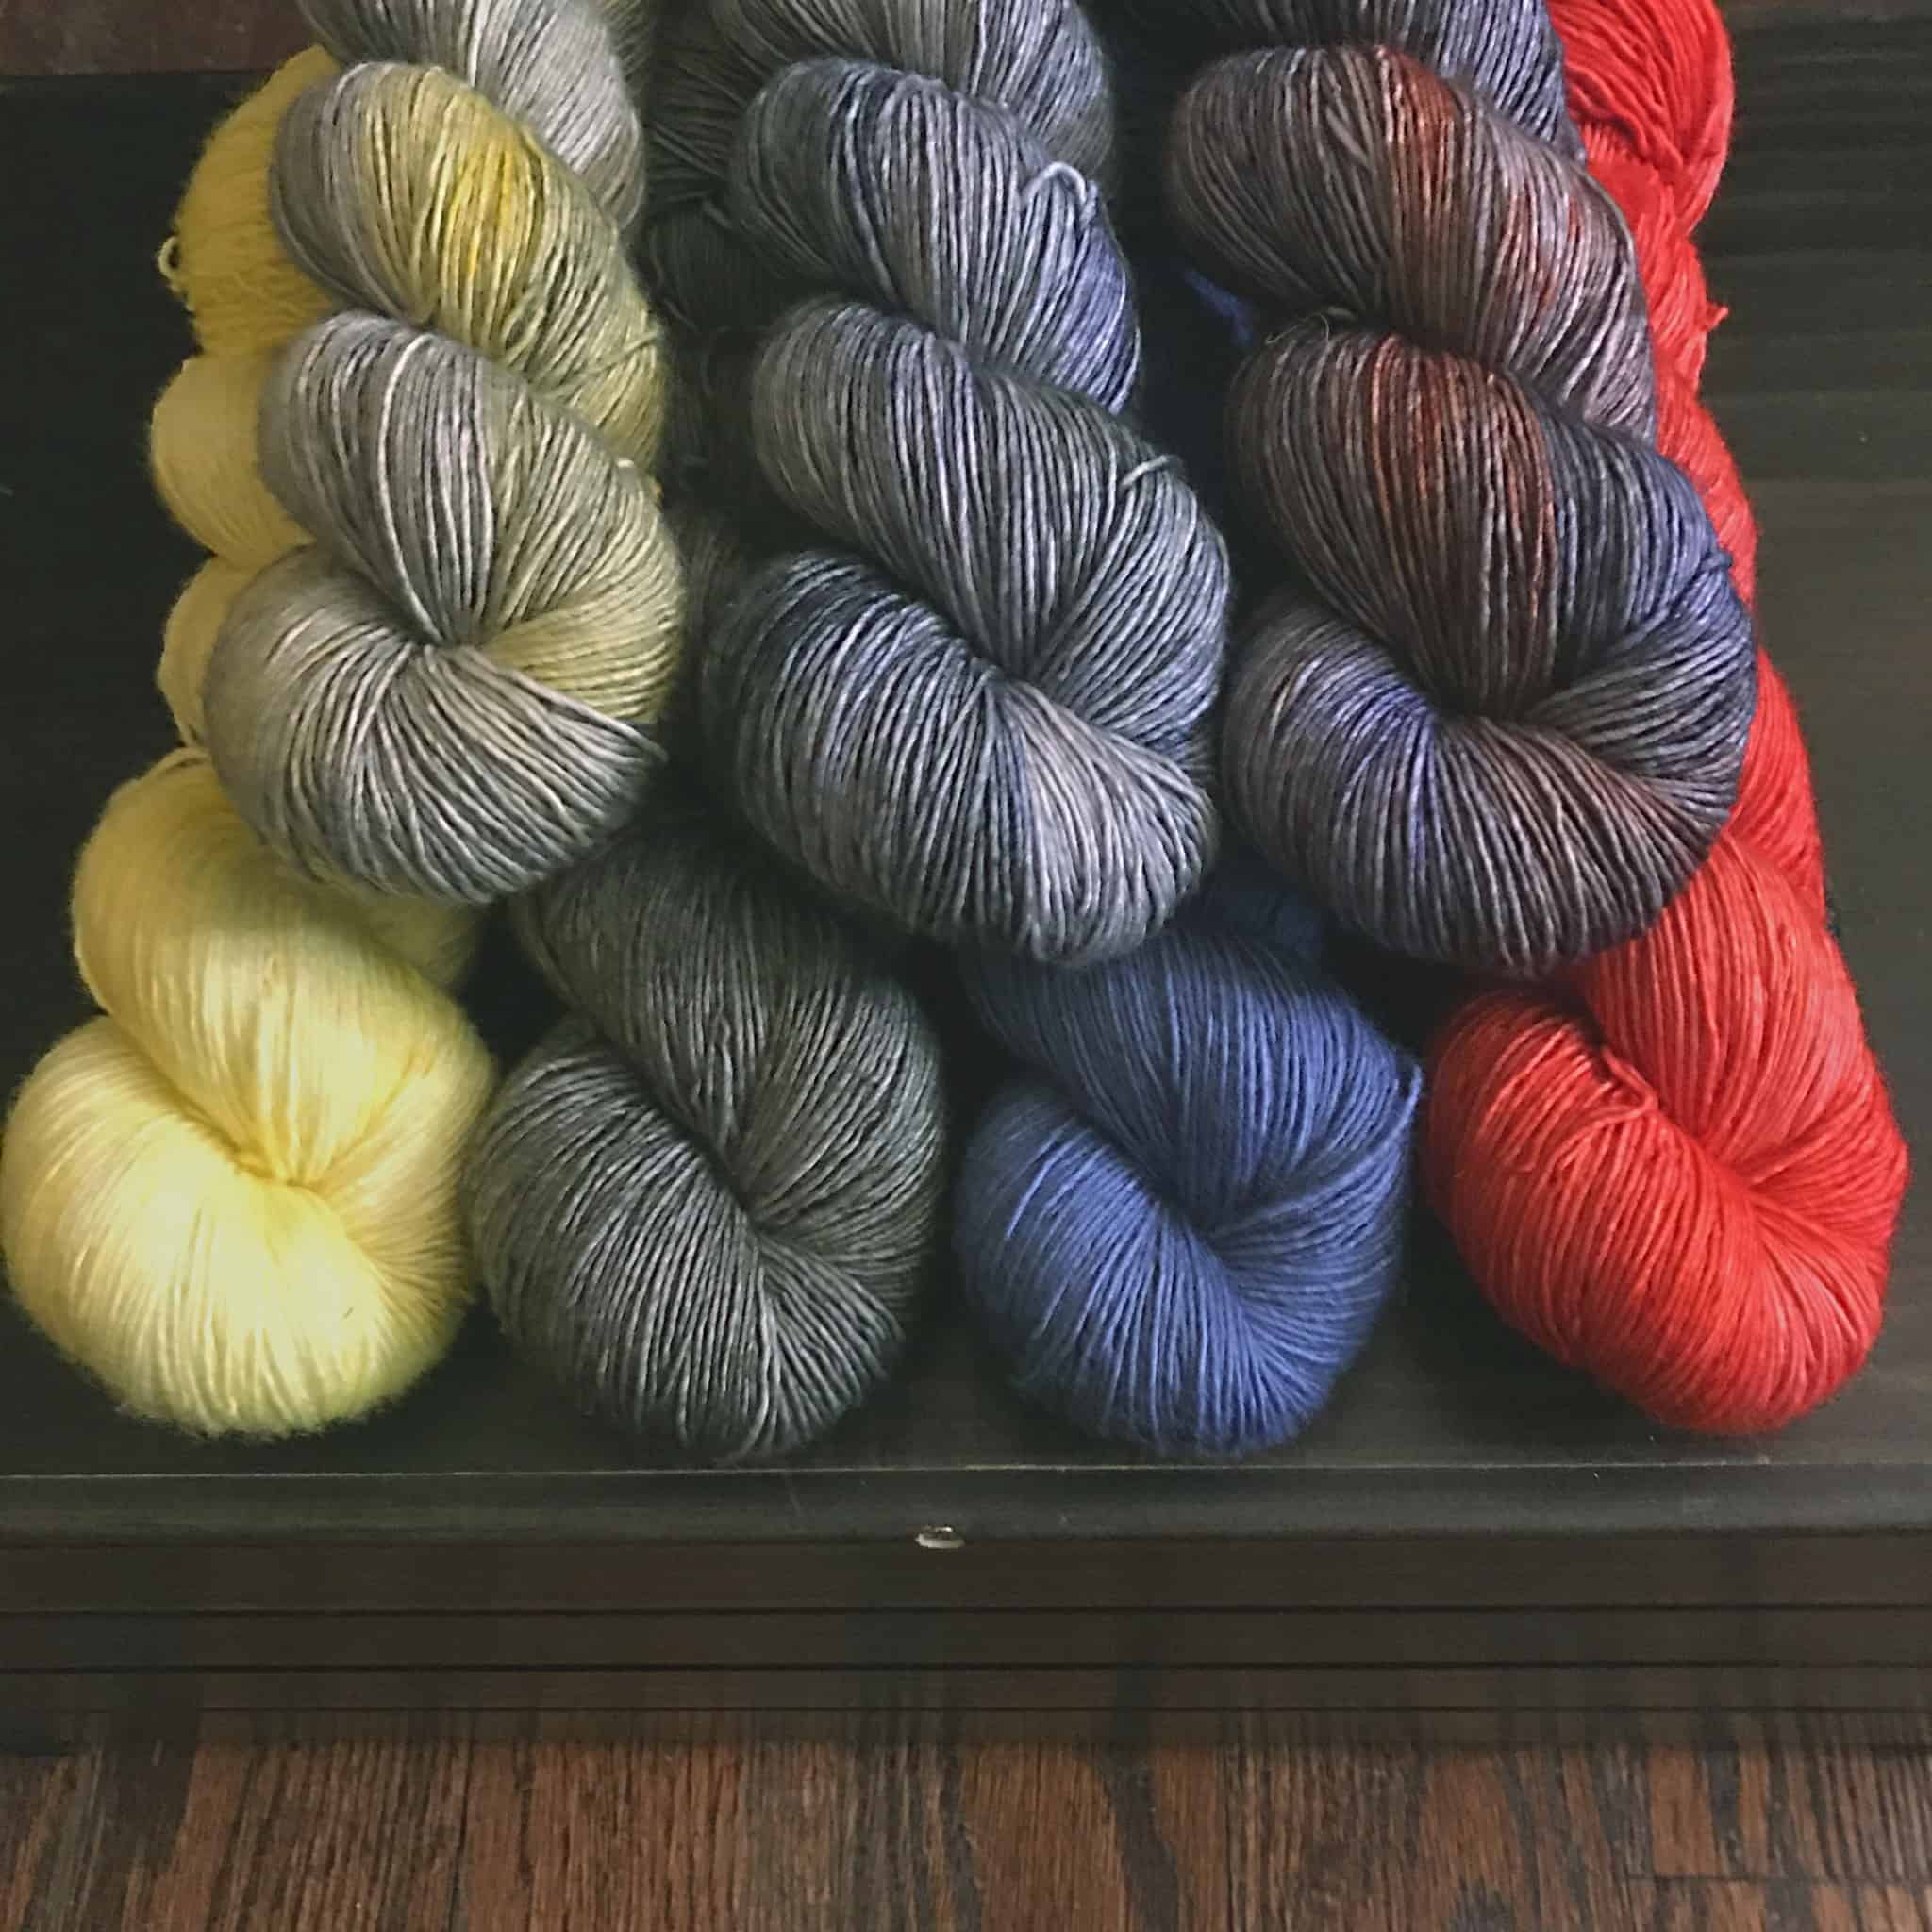 Gray, yellow, blue and red yarn.